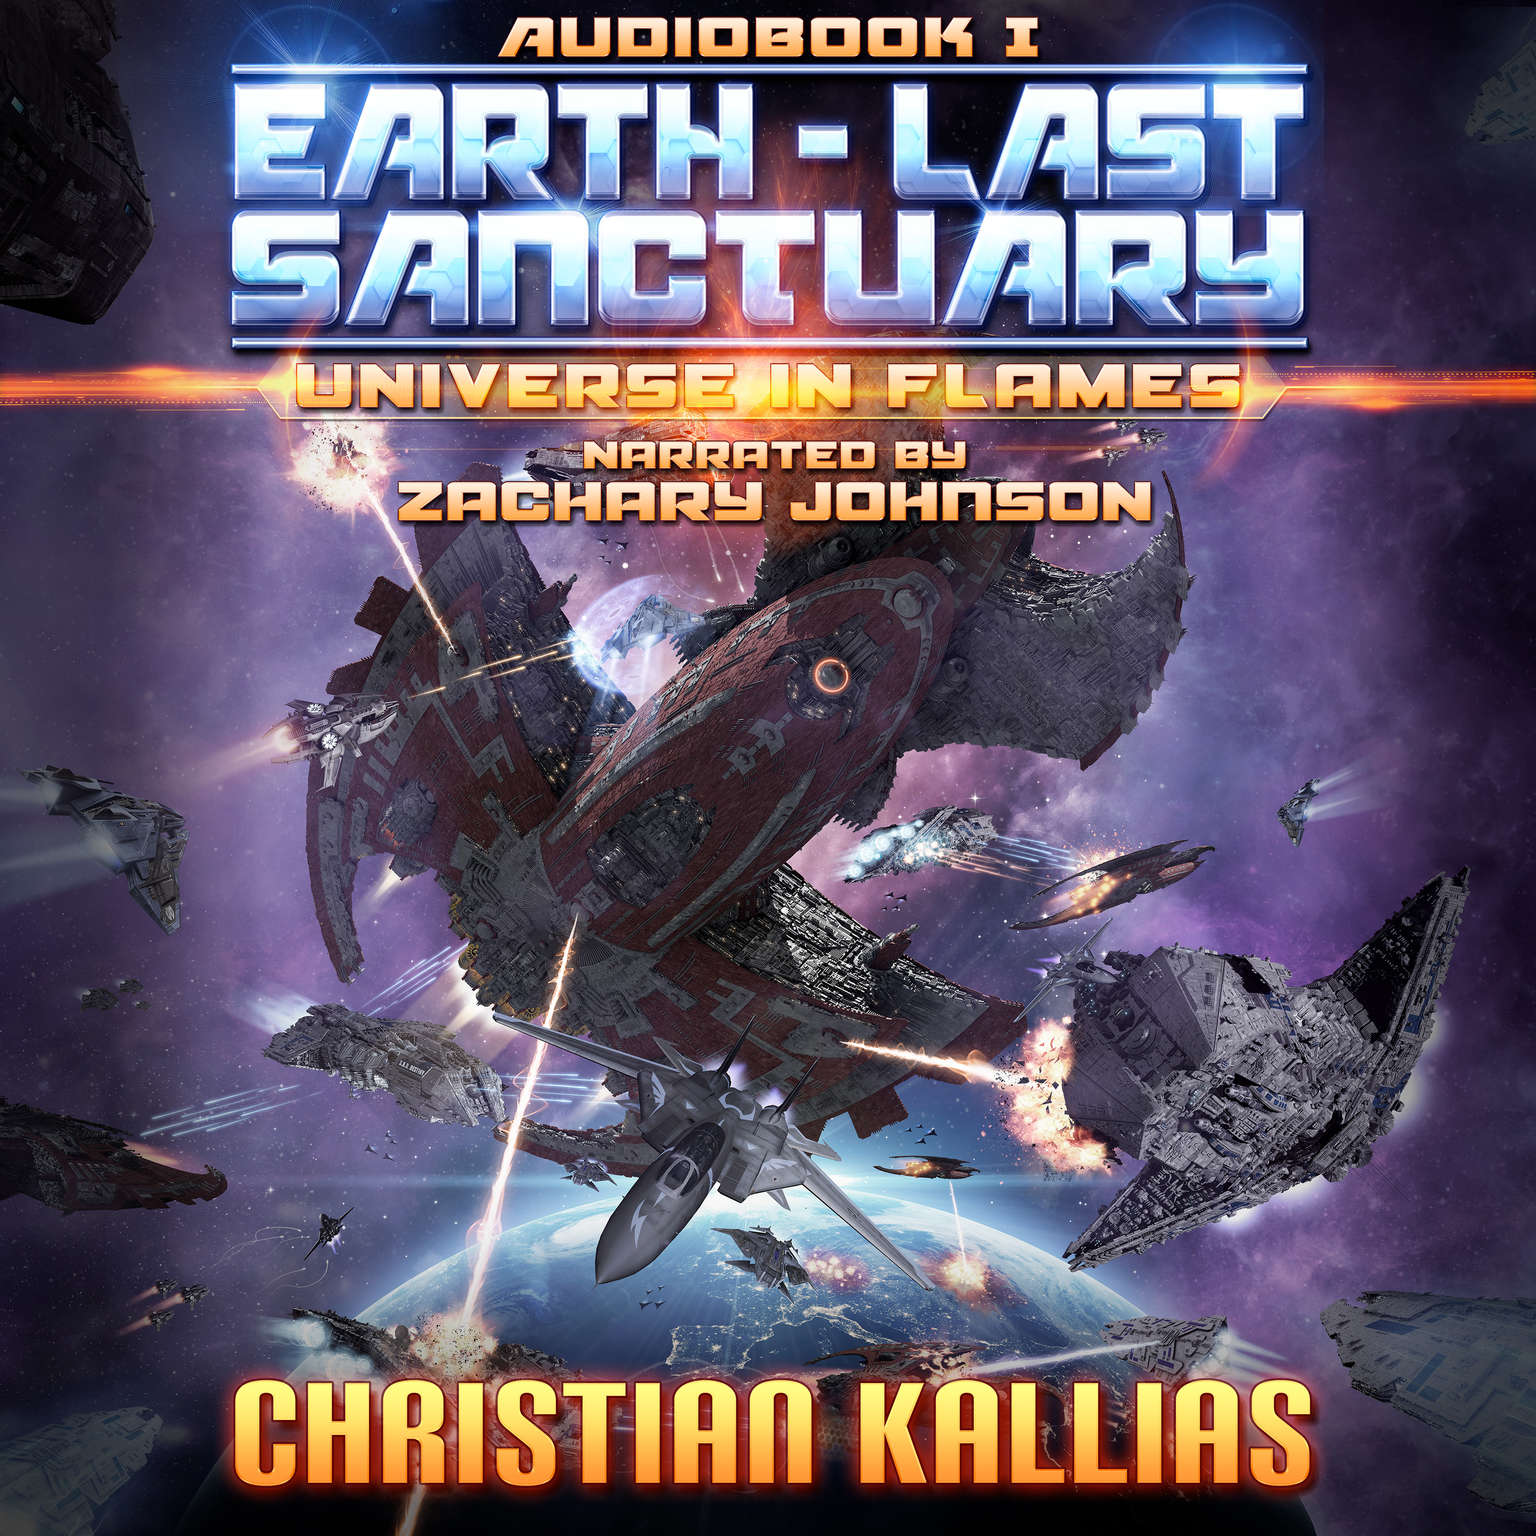 Earth - Last Sanctuary (Universe in Flames Audiobook 1) Audiobook, by Christian Kallias